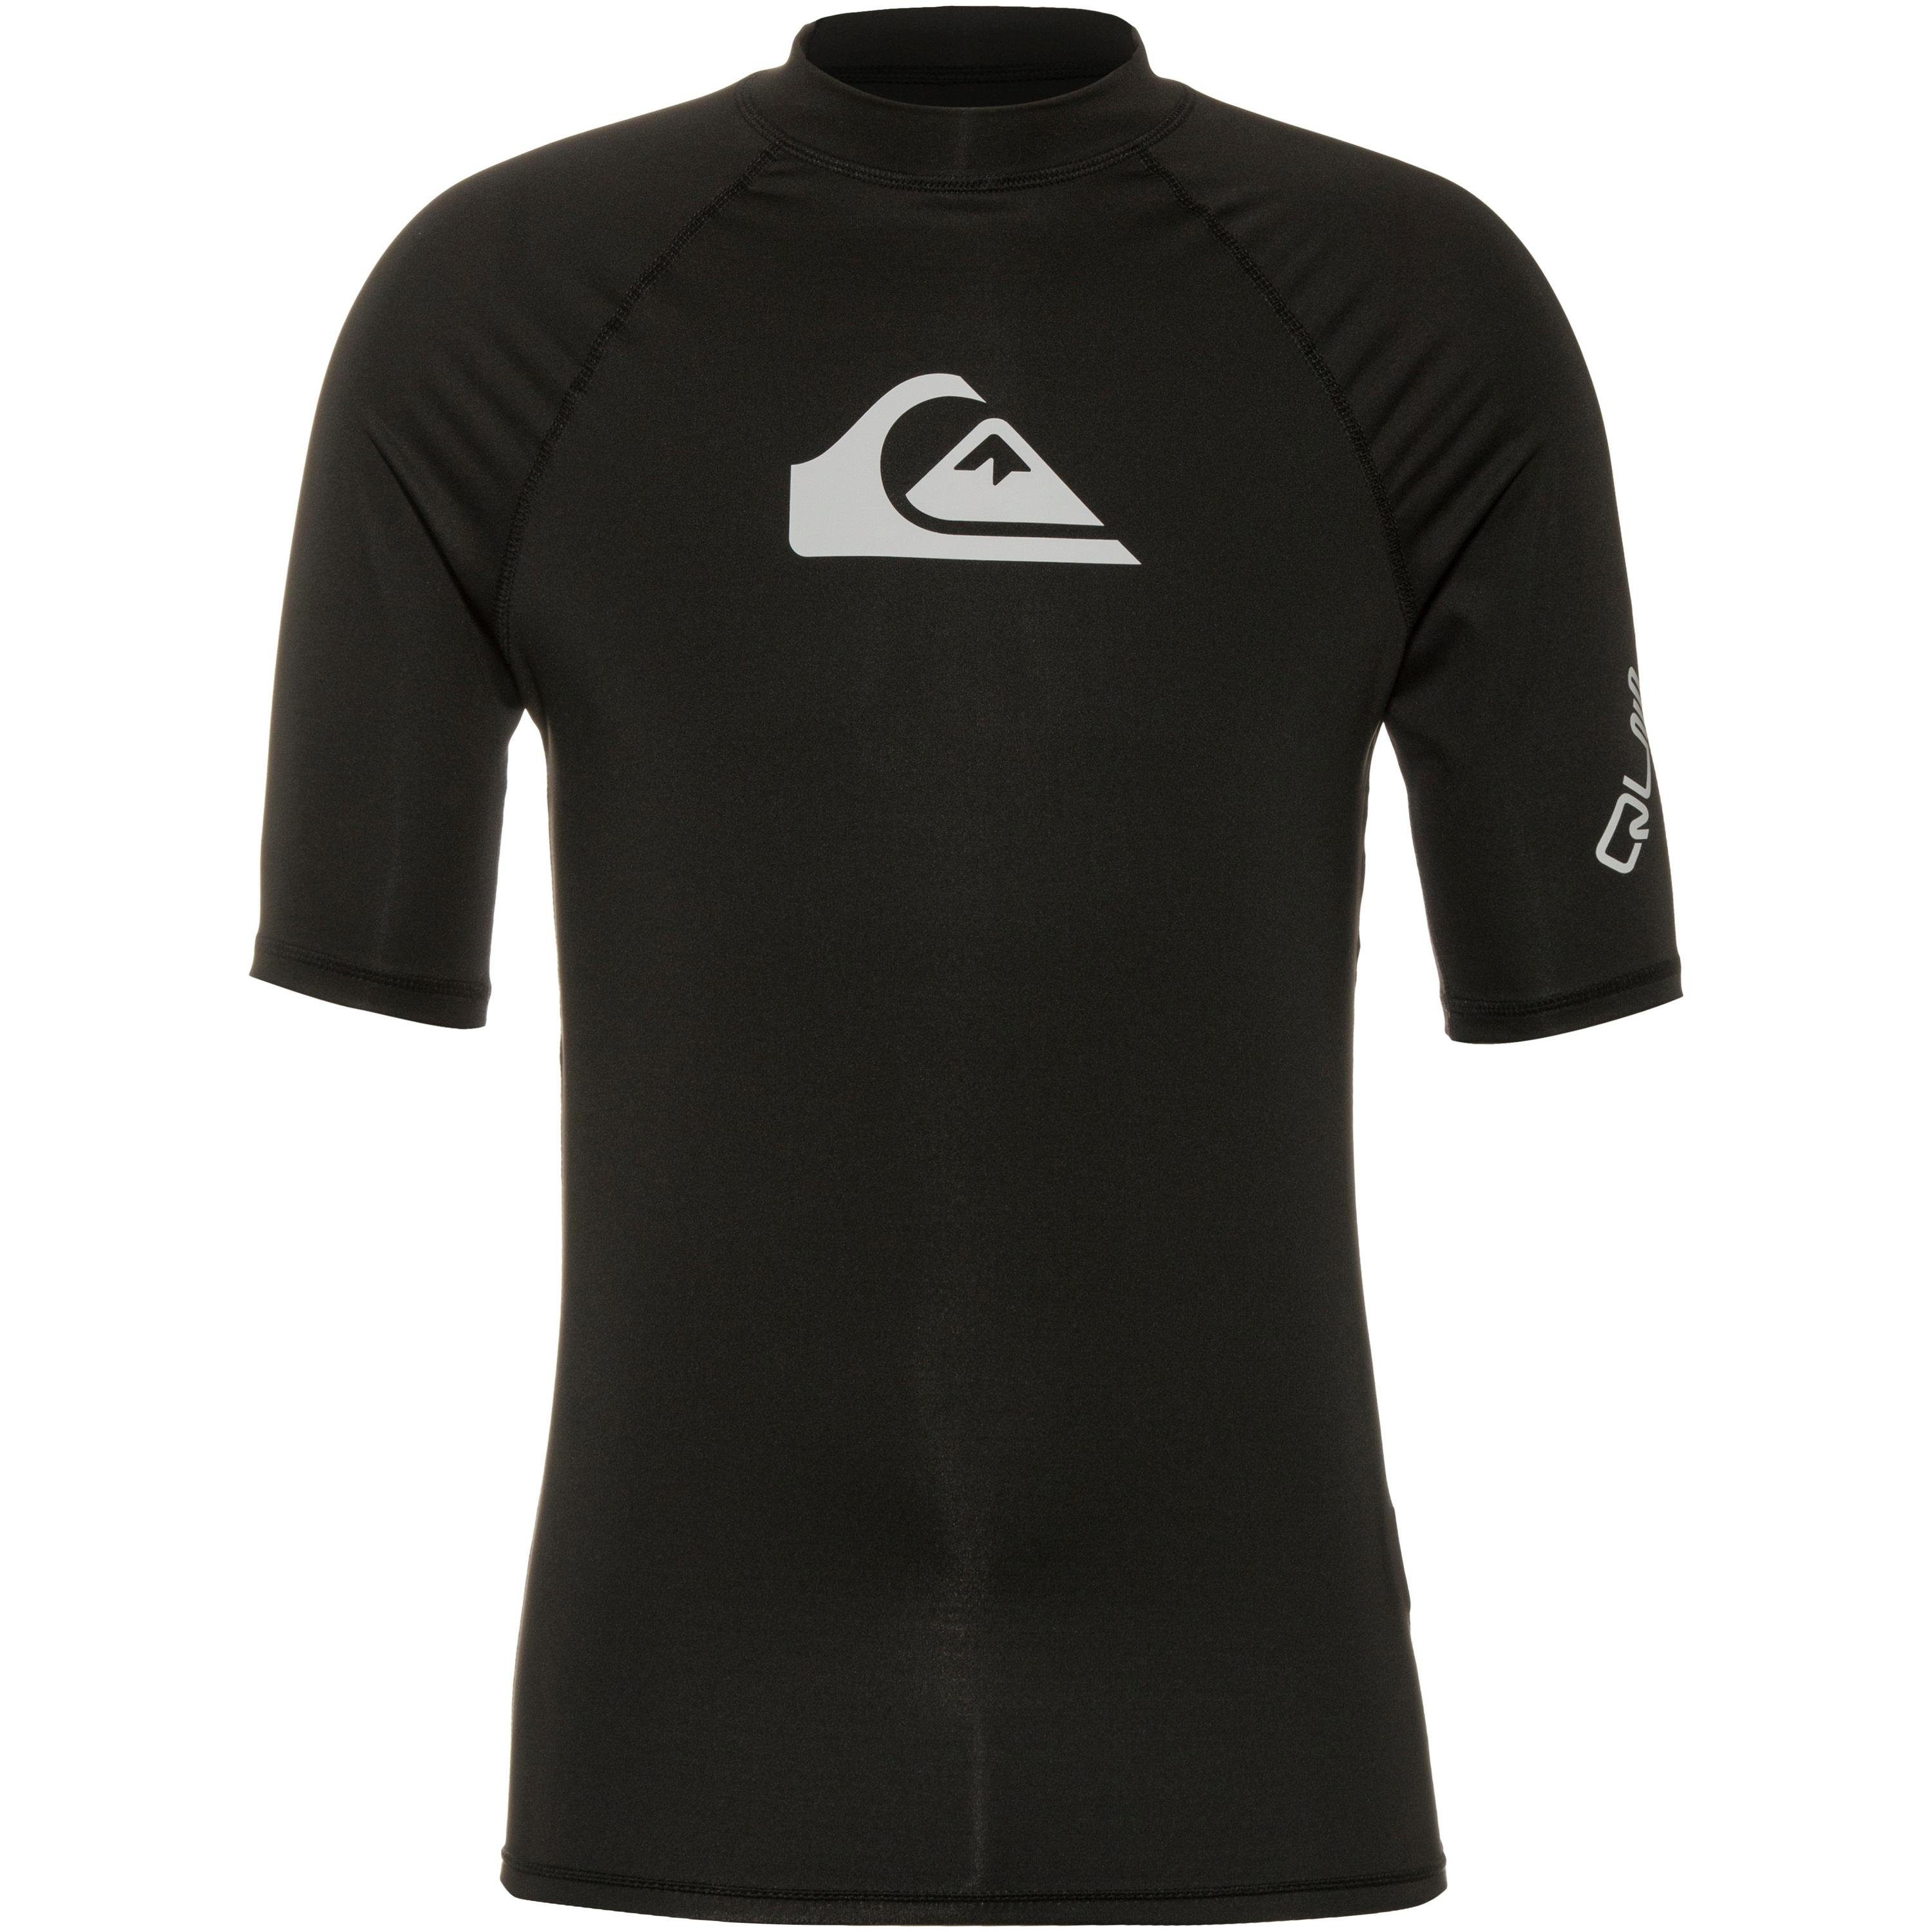 Quiksilver T-Shirt ALL TIME black